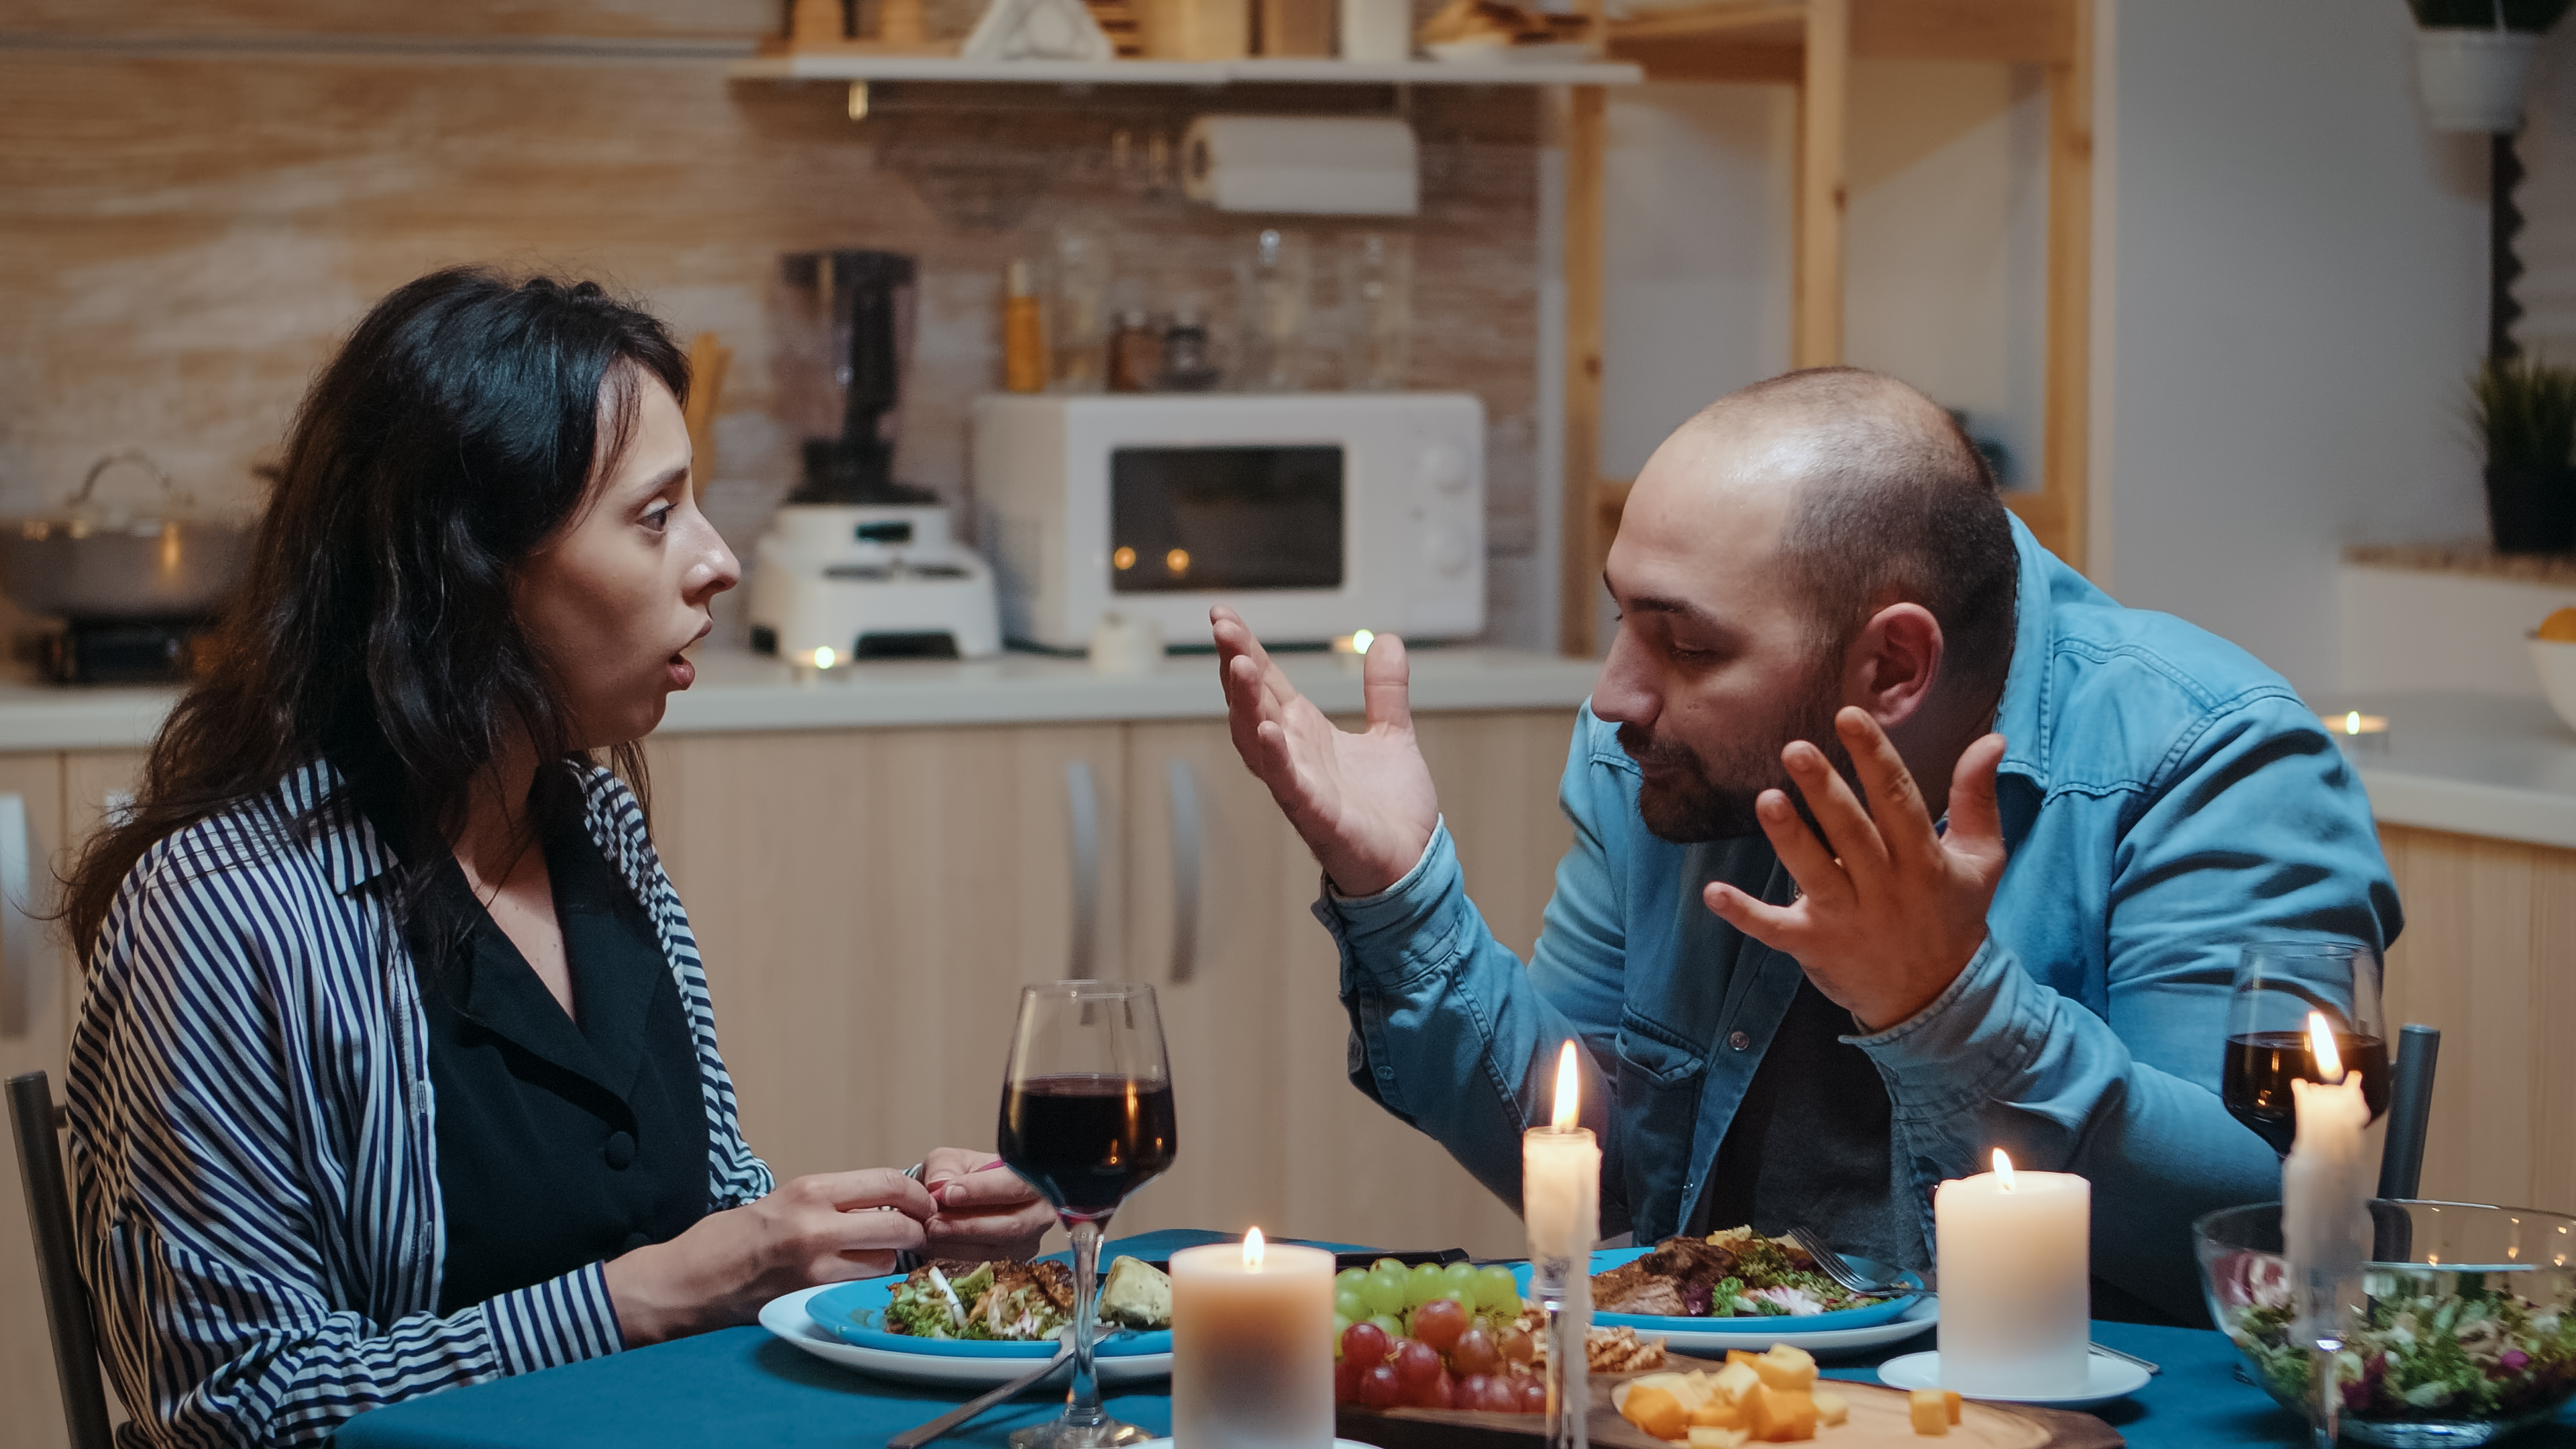 A man is arguing with his girlfriend during dinner | Source: Shutterstock